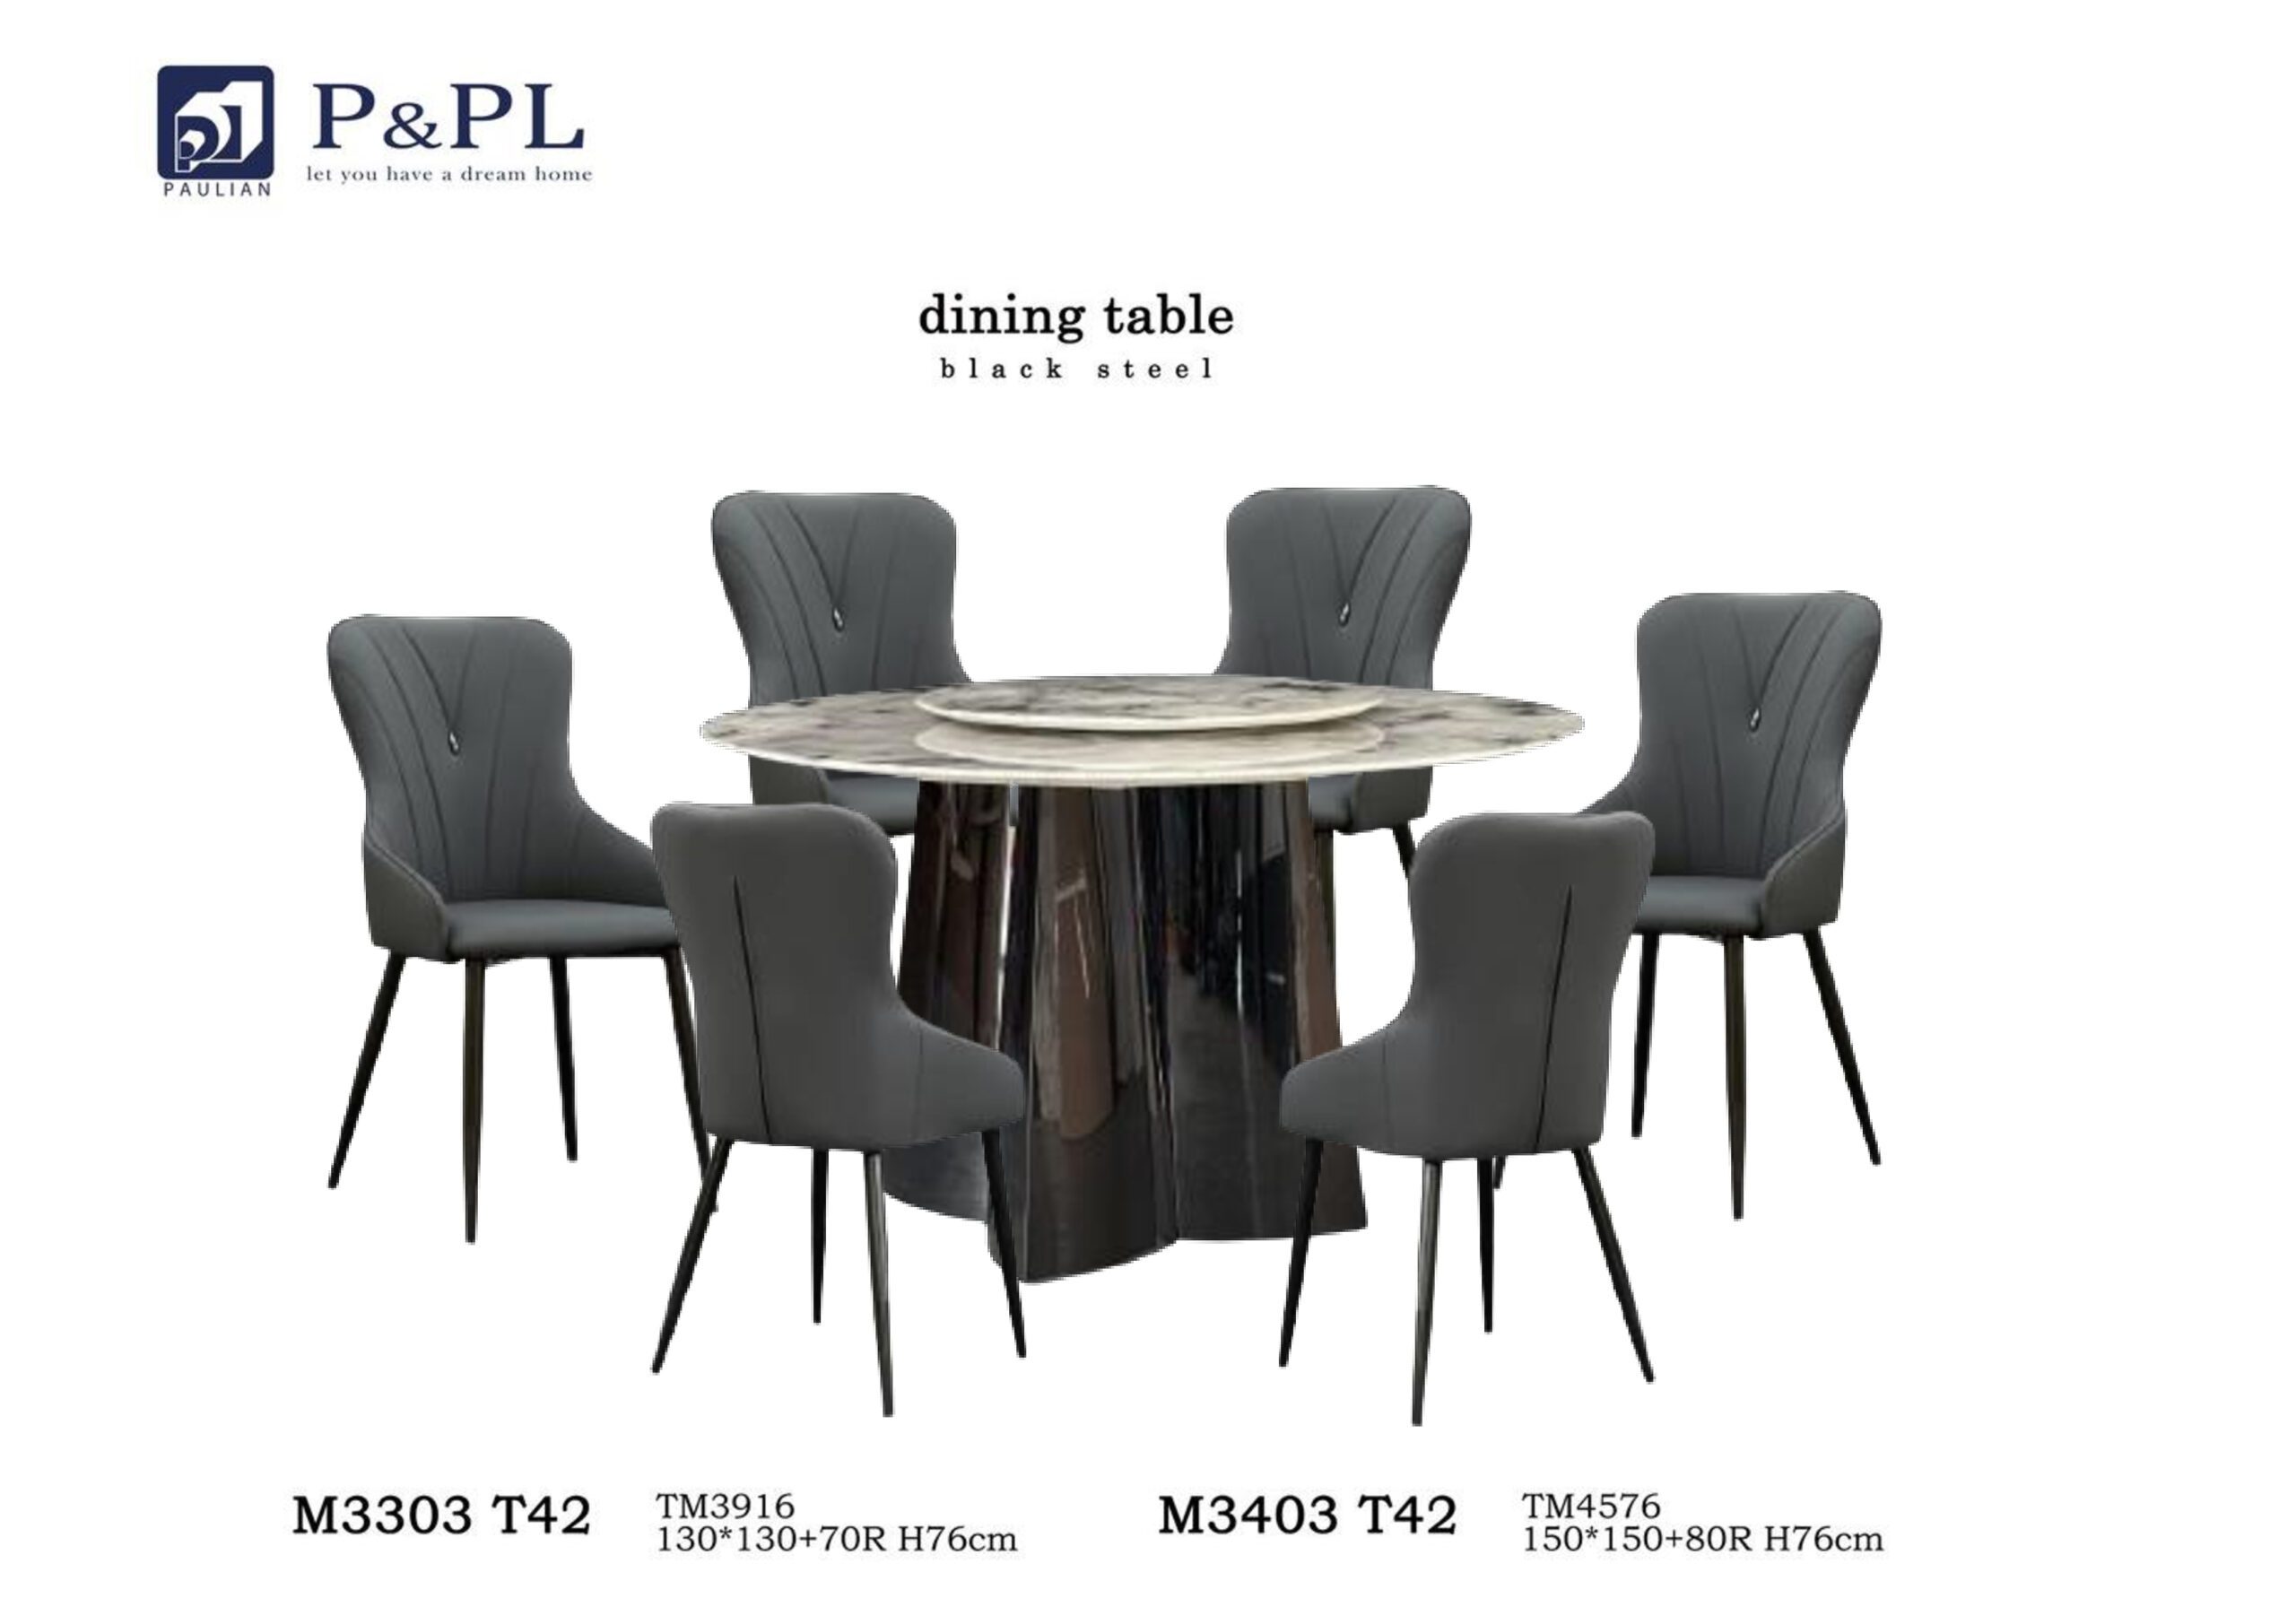 NATURAL STONE DINING SET – M3403 T42